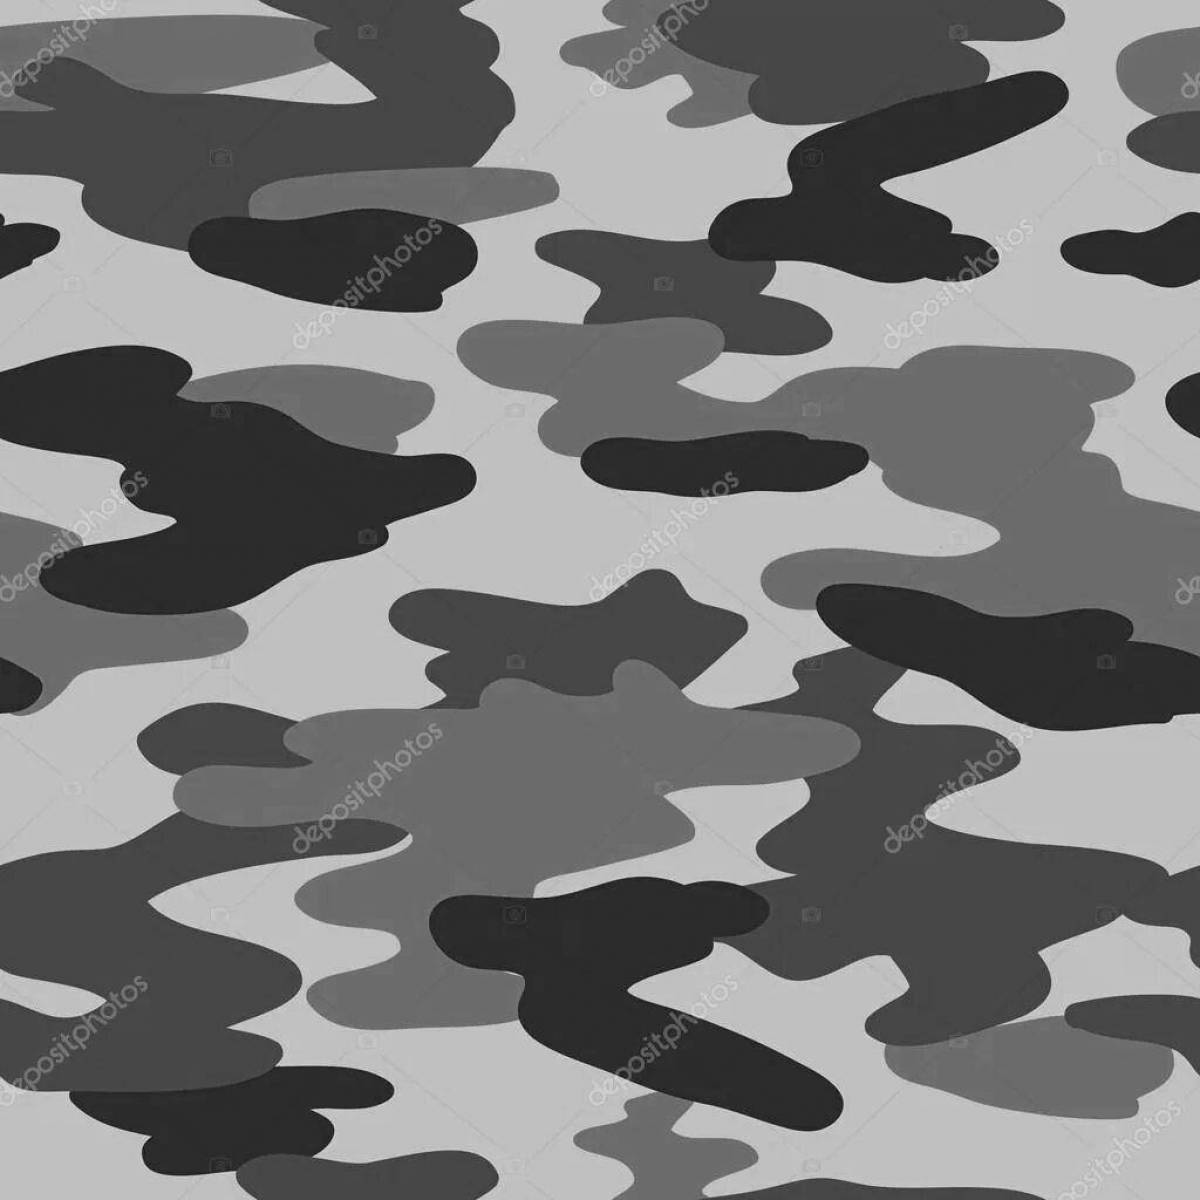 Coloring page with intricate camouflage pattern